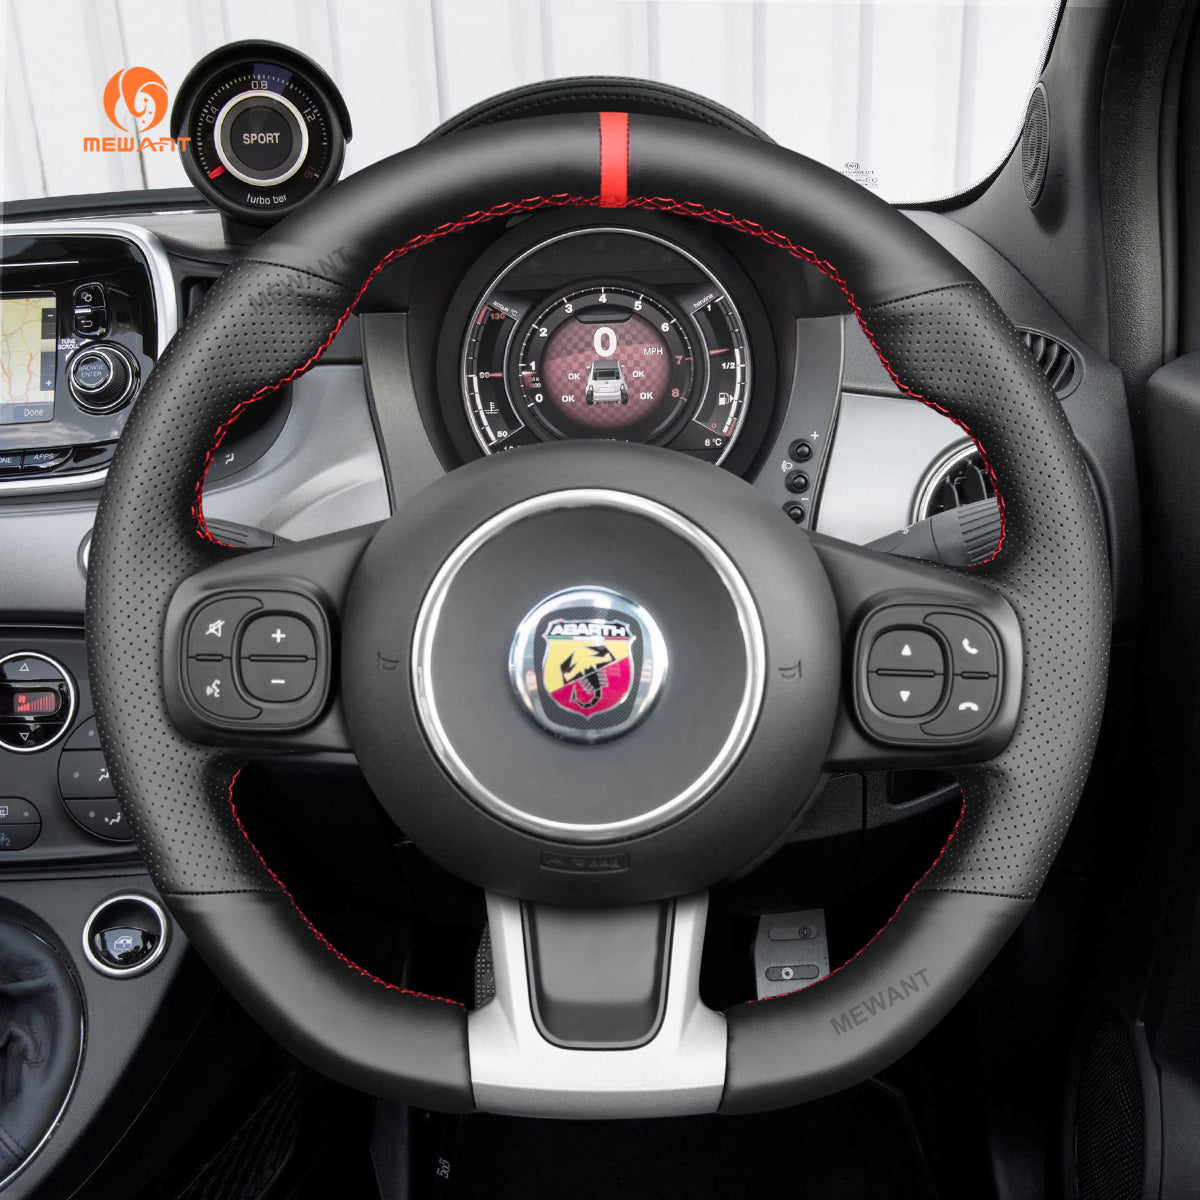 MEWANT Black Leather Suede Car Steering Wheel Cover for Abarth 595(C) 695(C) Fiat 500 Abarth 595 693